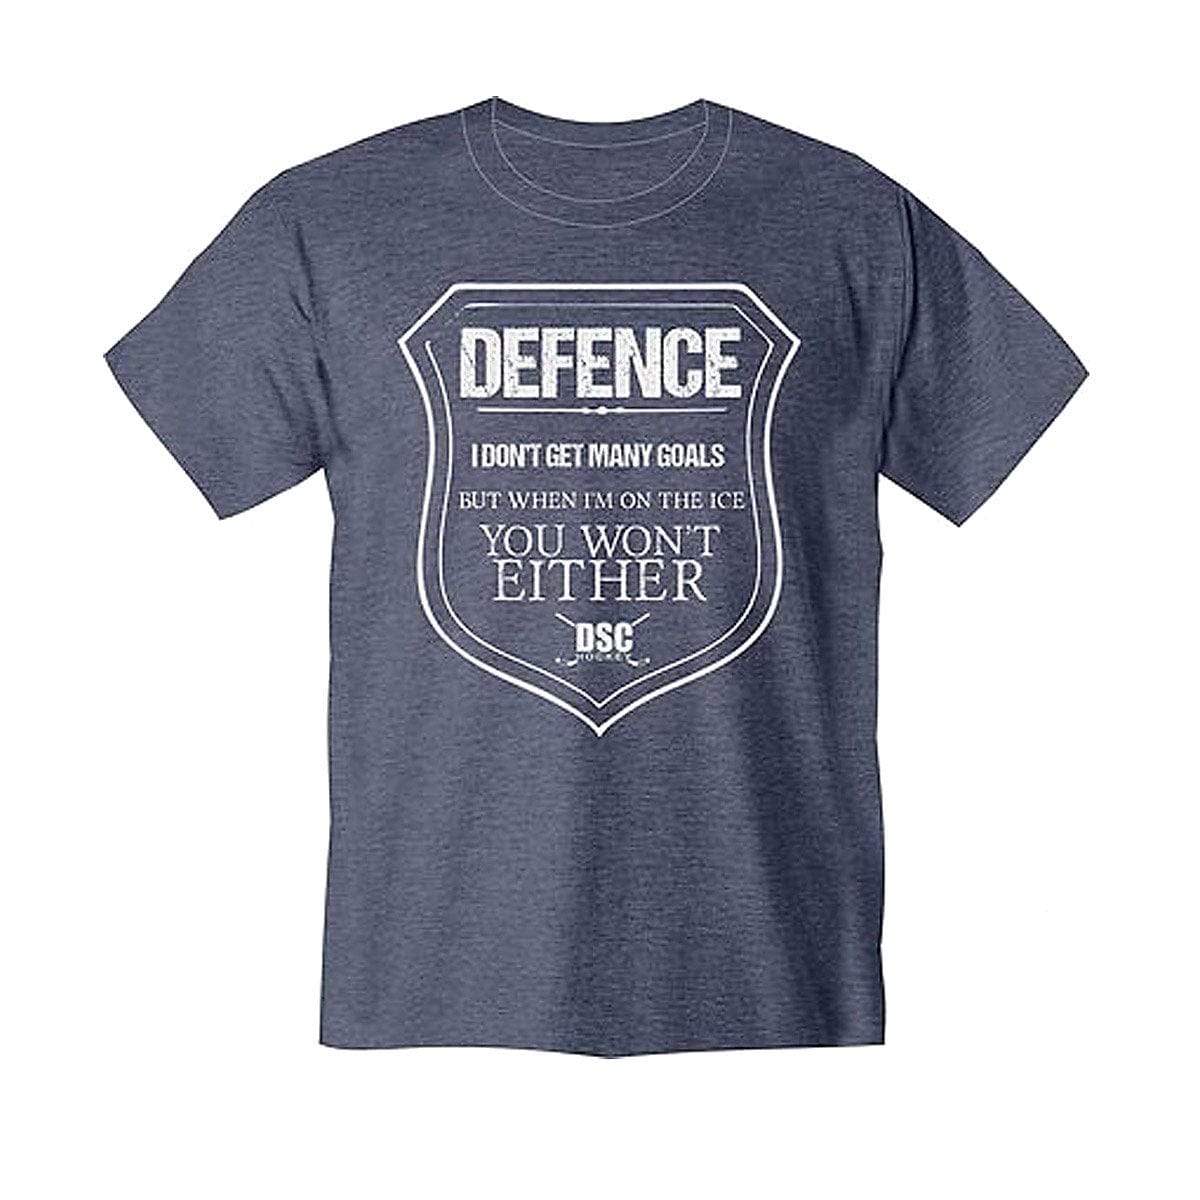 DSC Hockey Defence Youth Shirt - The Hockey Shop Source For Sports